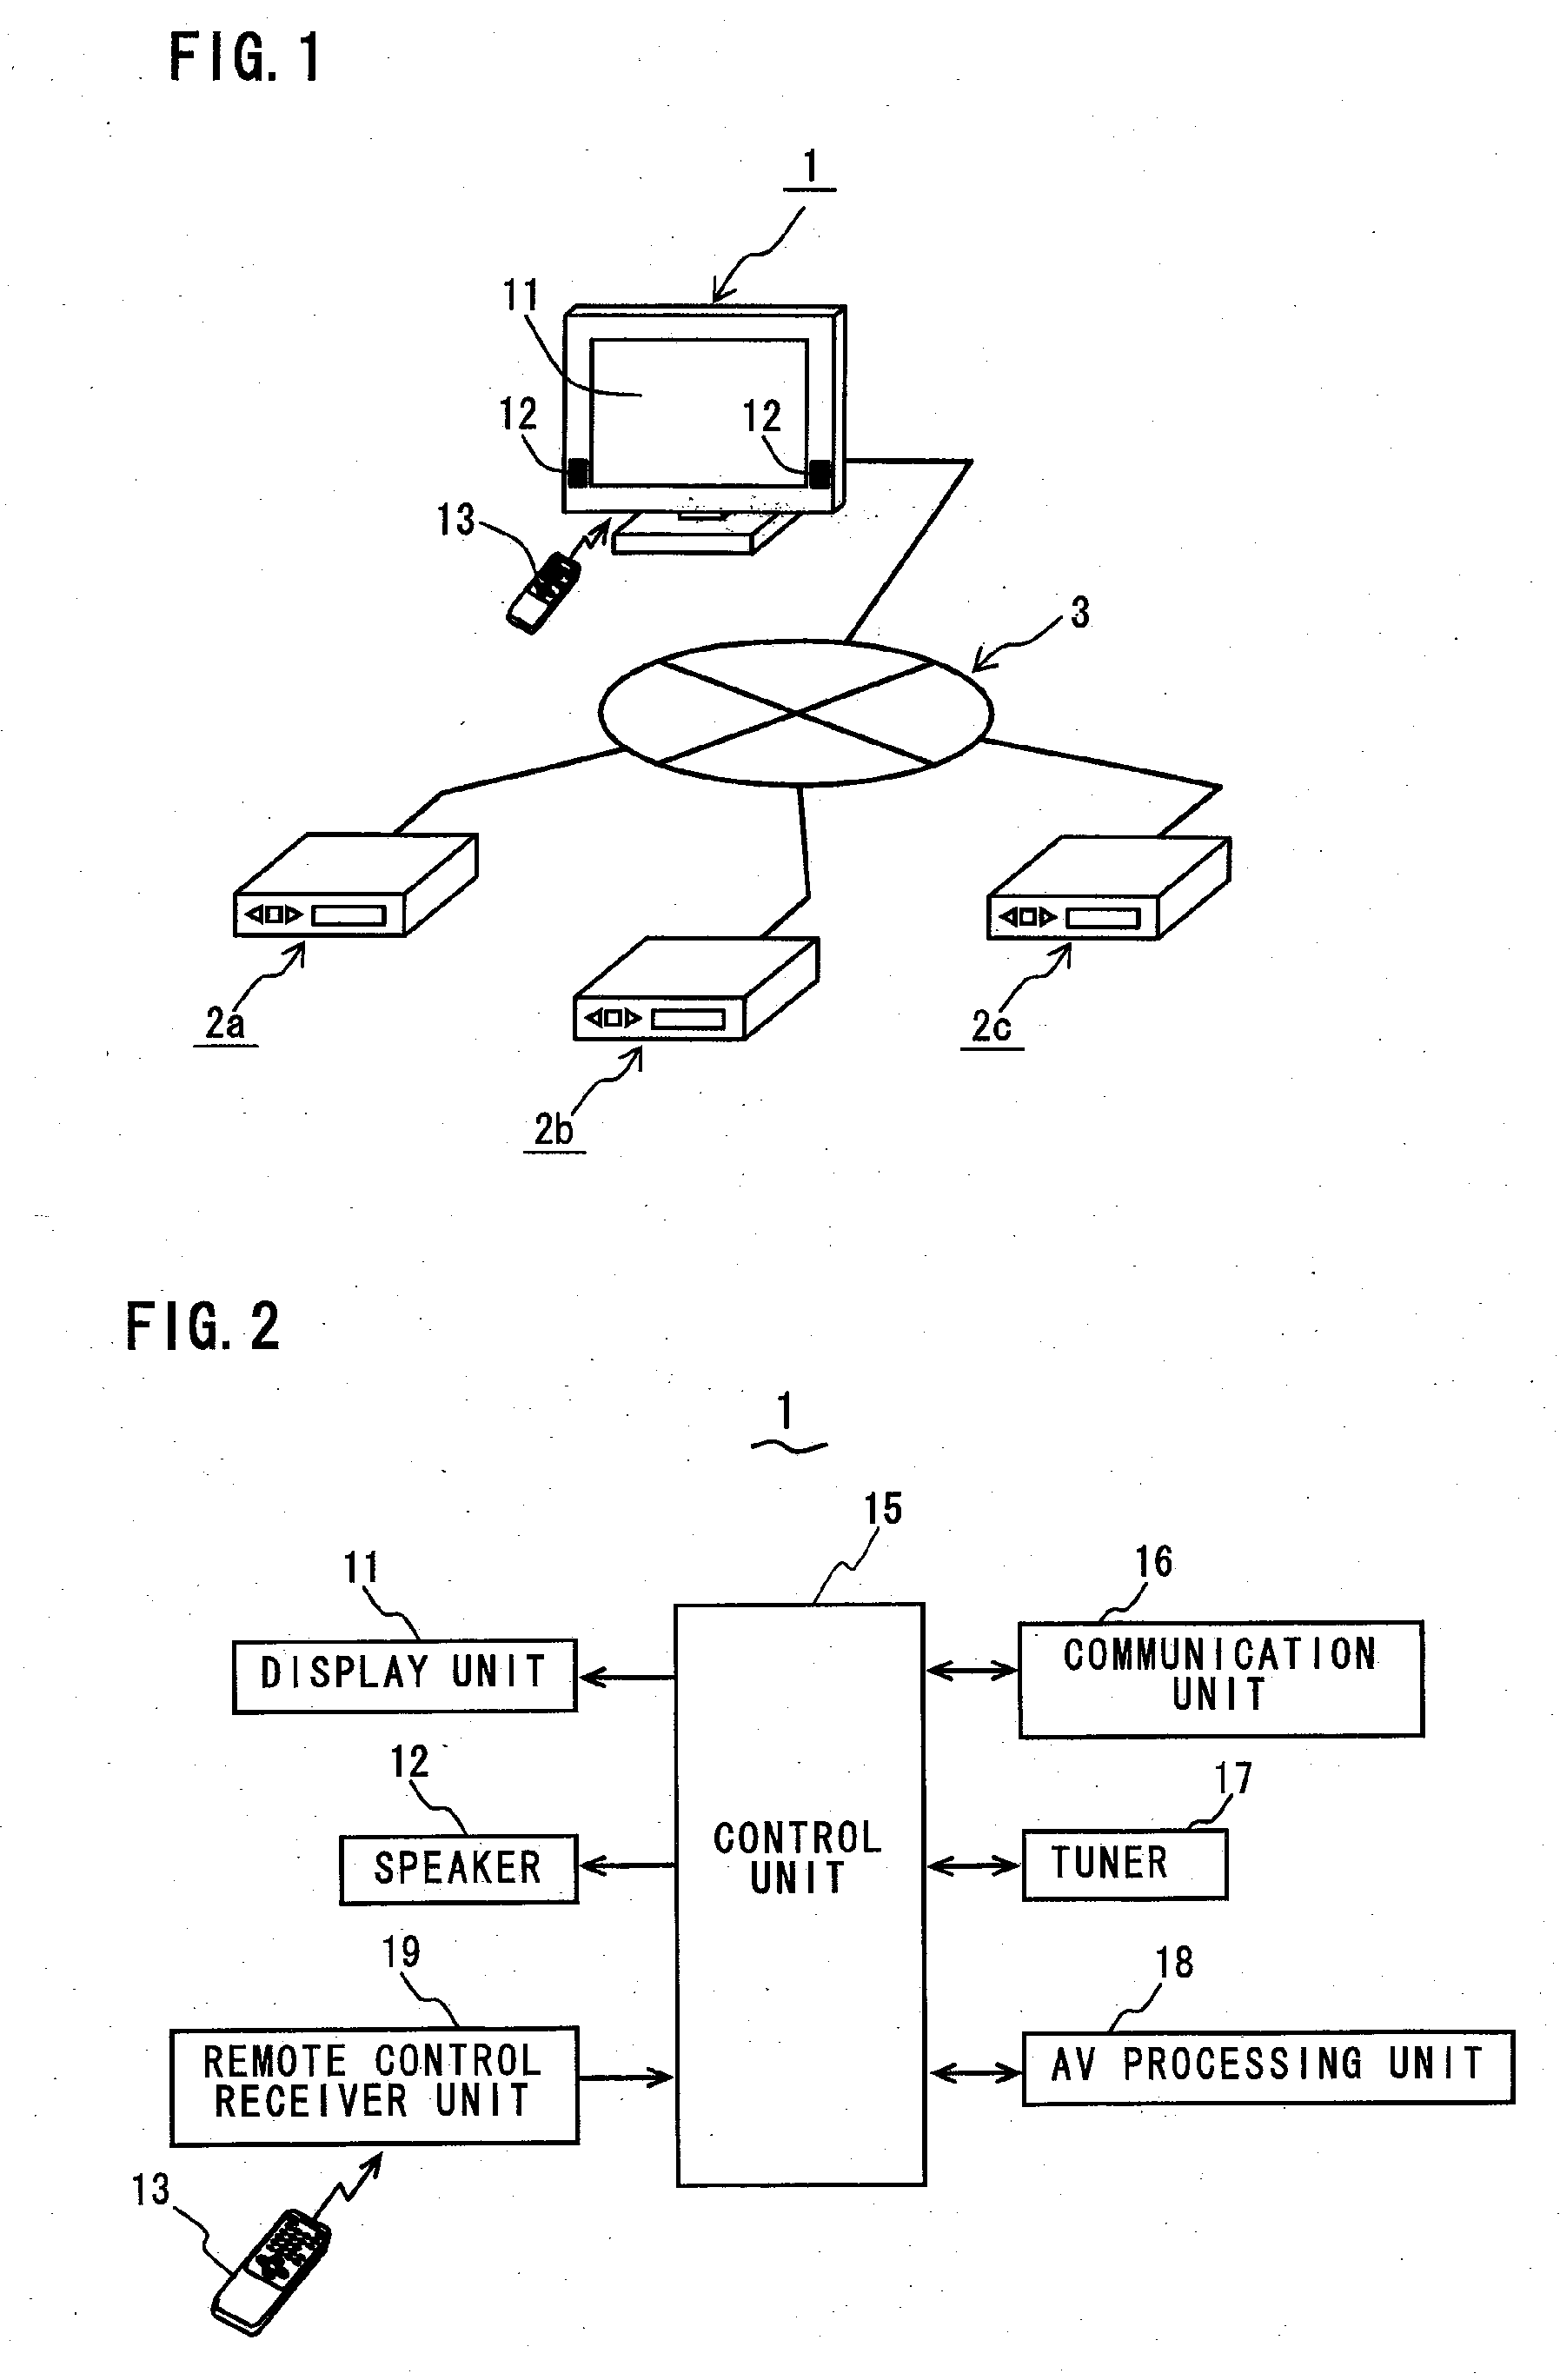 Content Reproducing Device